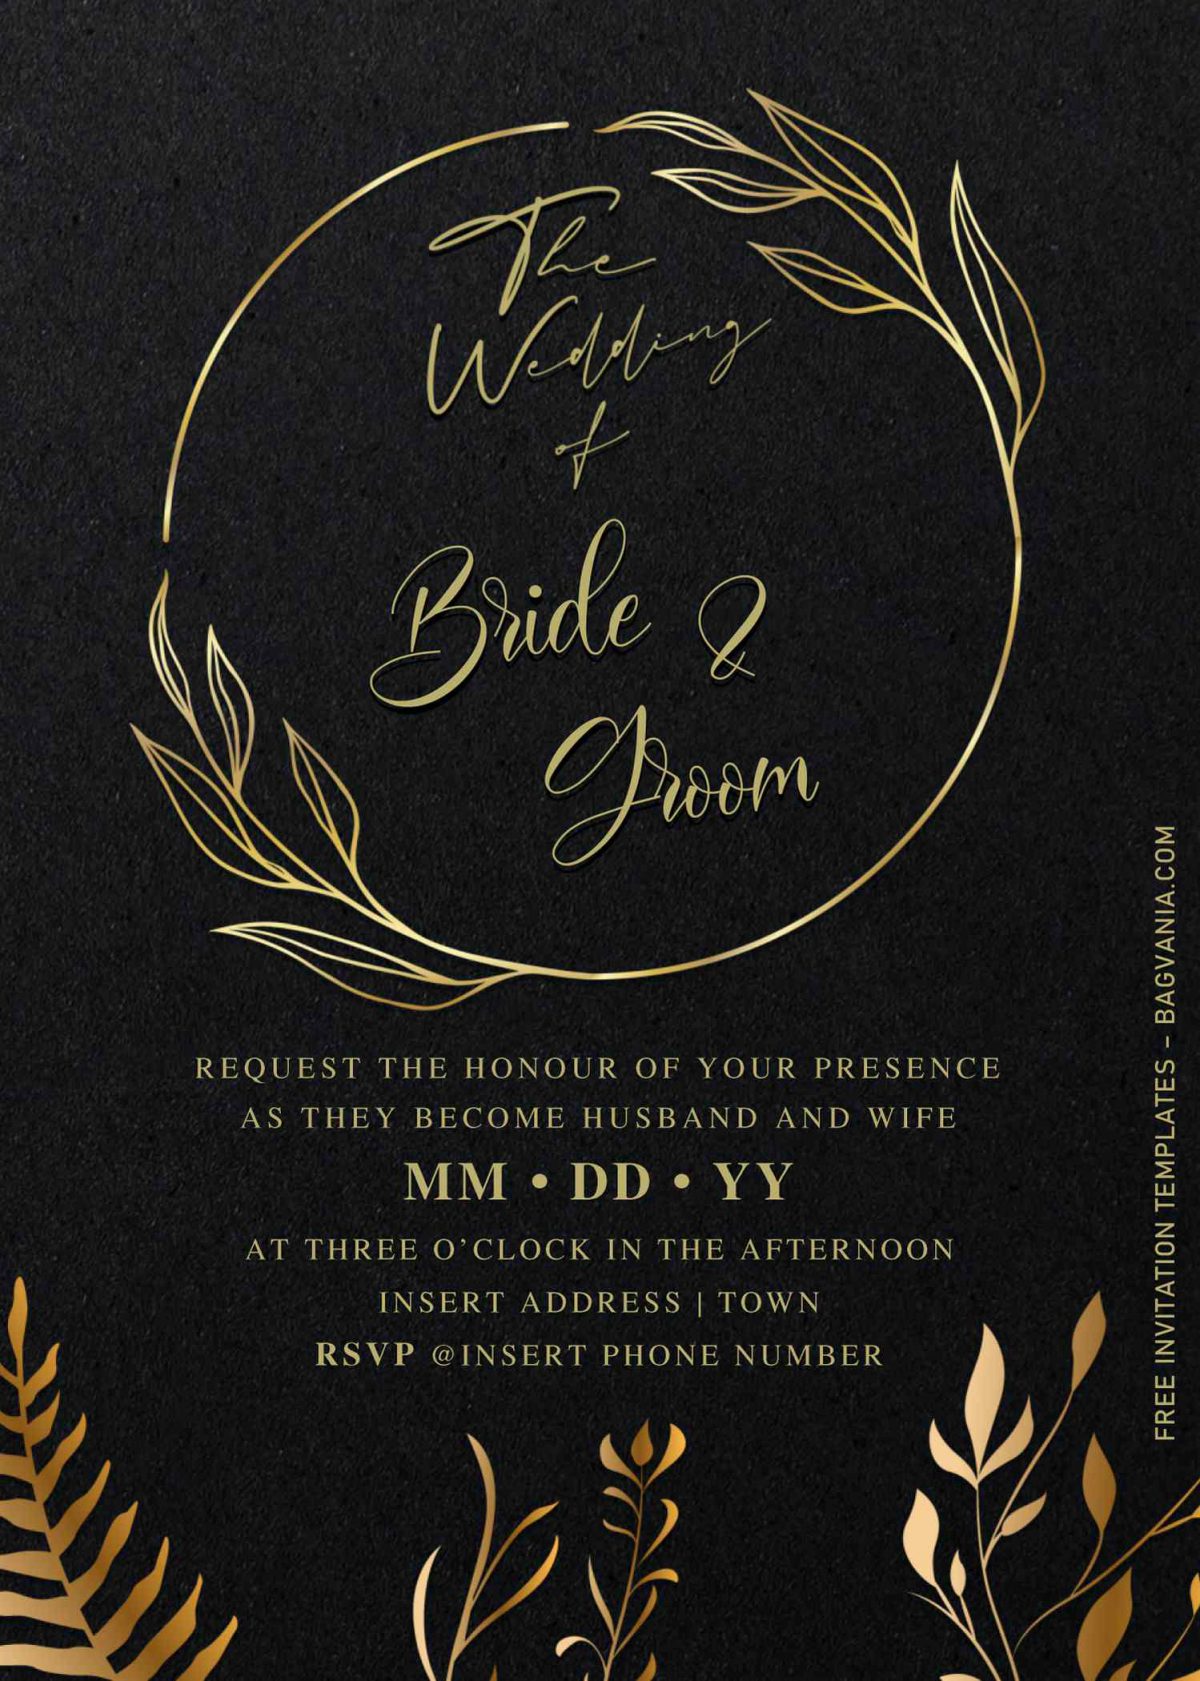 Free Elegant Black And Gold Wedding Invitation Templates For Word and has custom flower wreath in gold and sand paper finished background